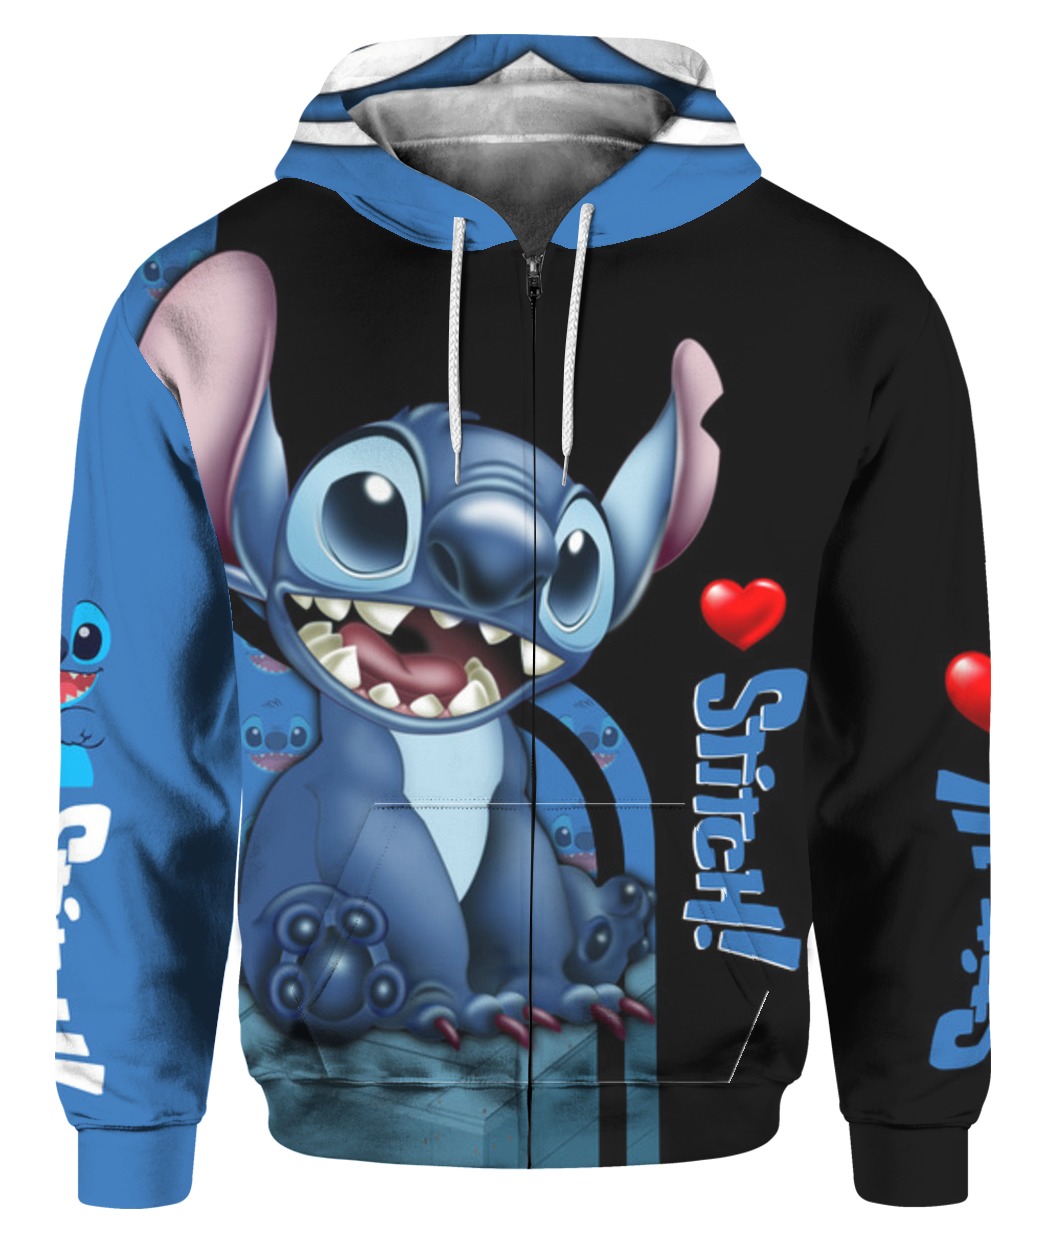 Stitch all over printed zip hoodie